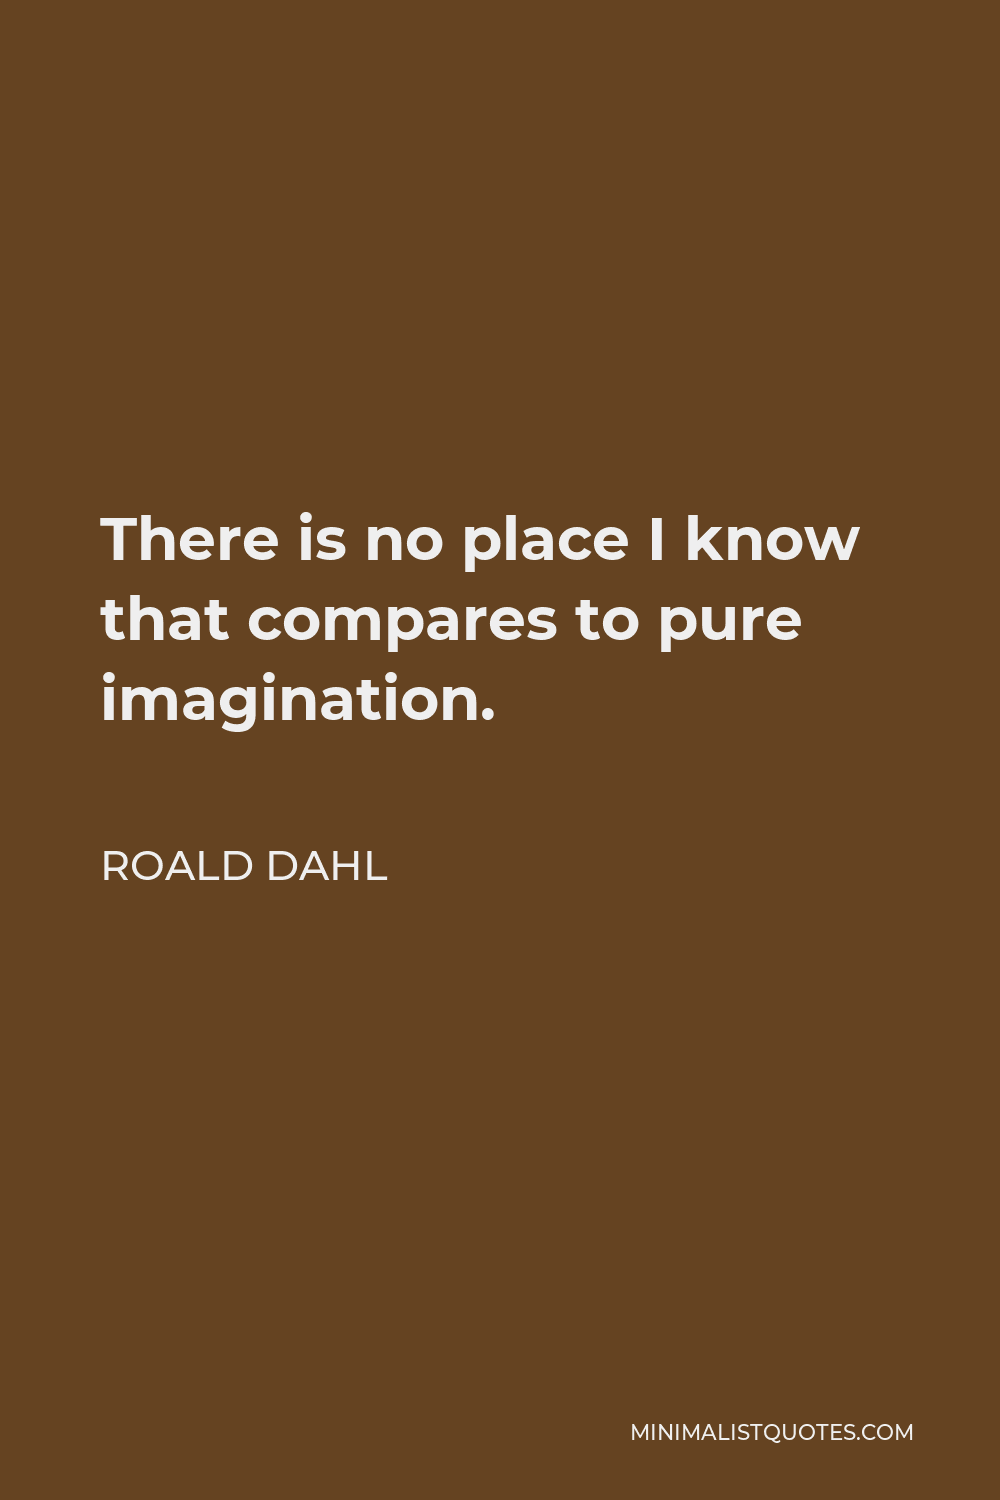 Roald Dahl Quote - There is no place I know that compares to pure imagination.